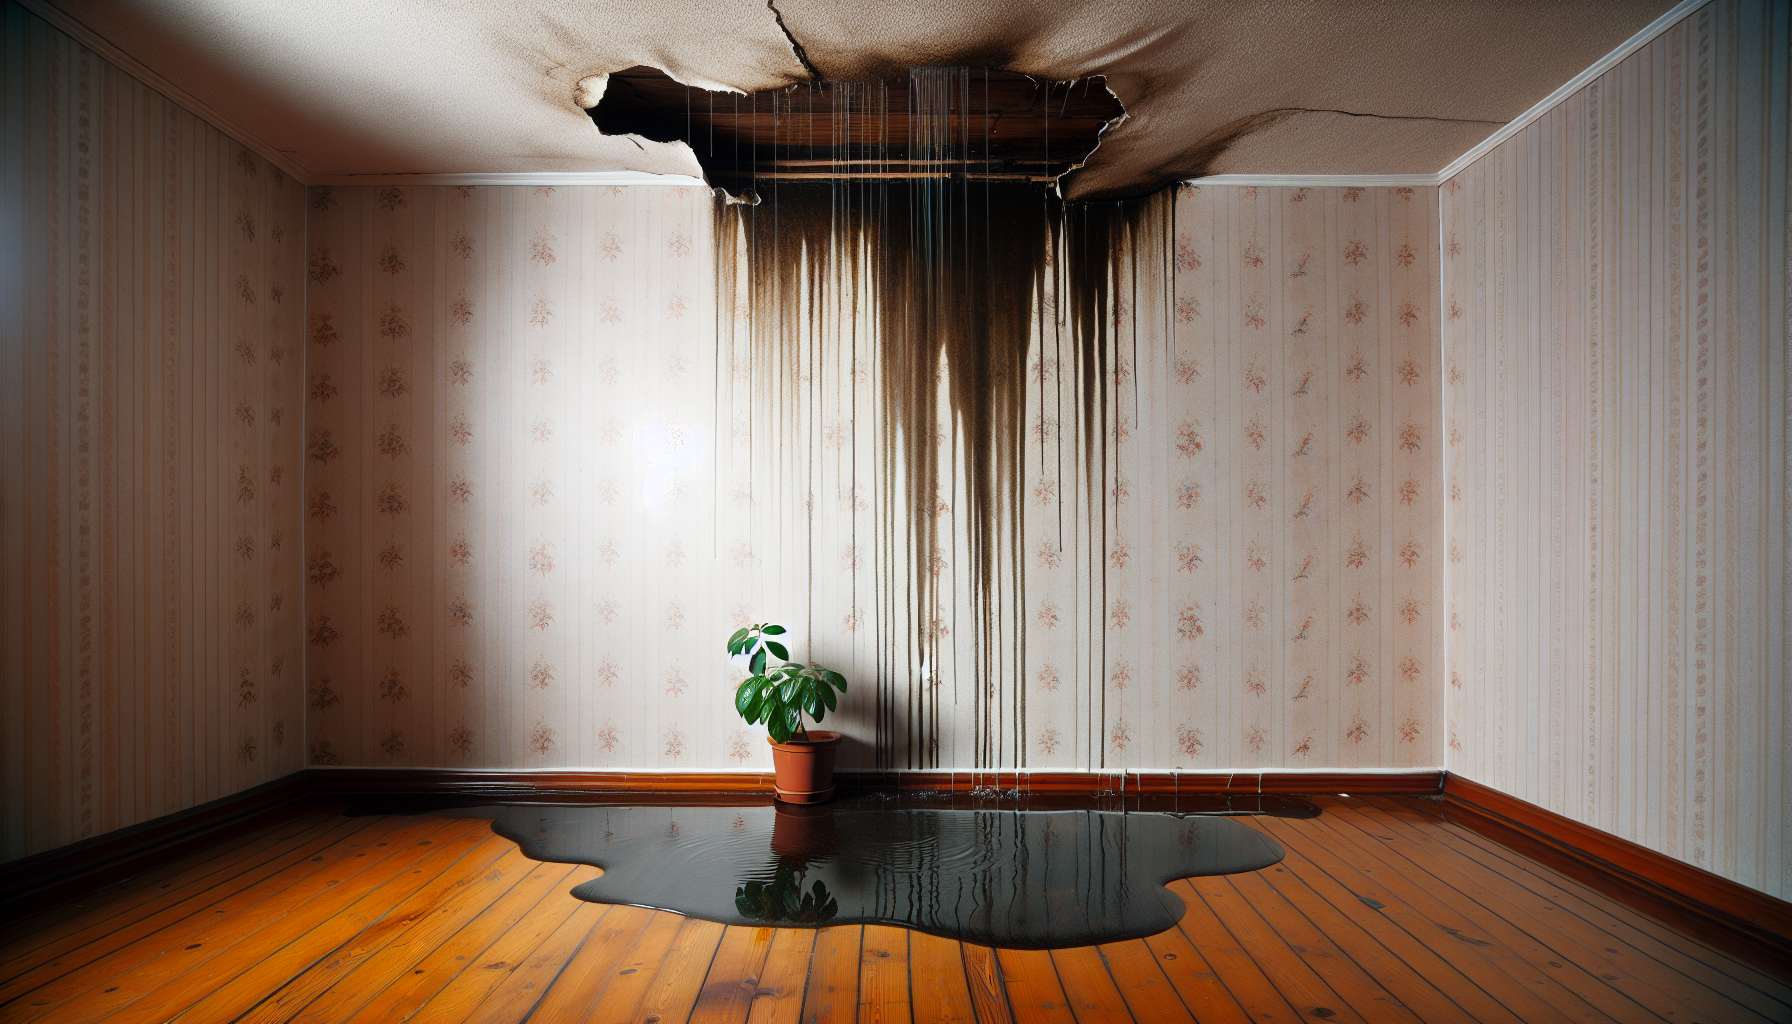 Illustration of water leak from upstairs flat causing damage to the floor